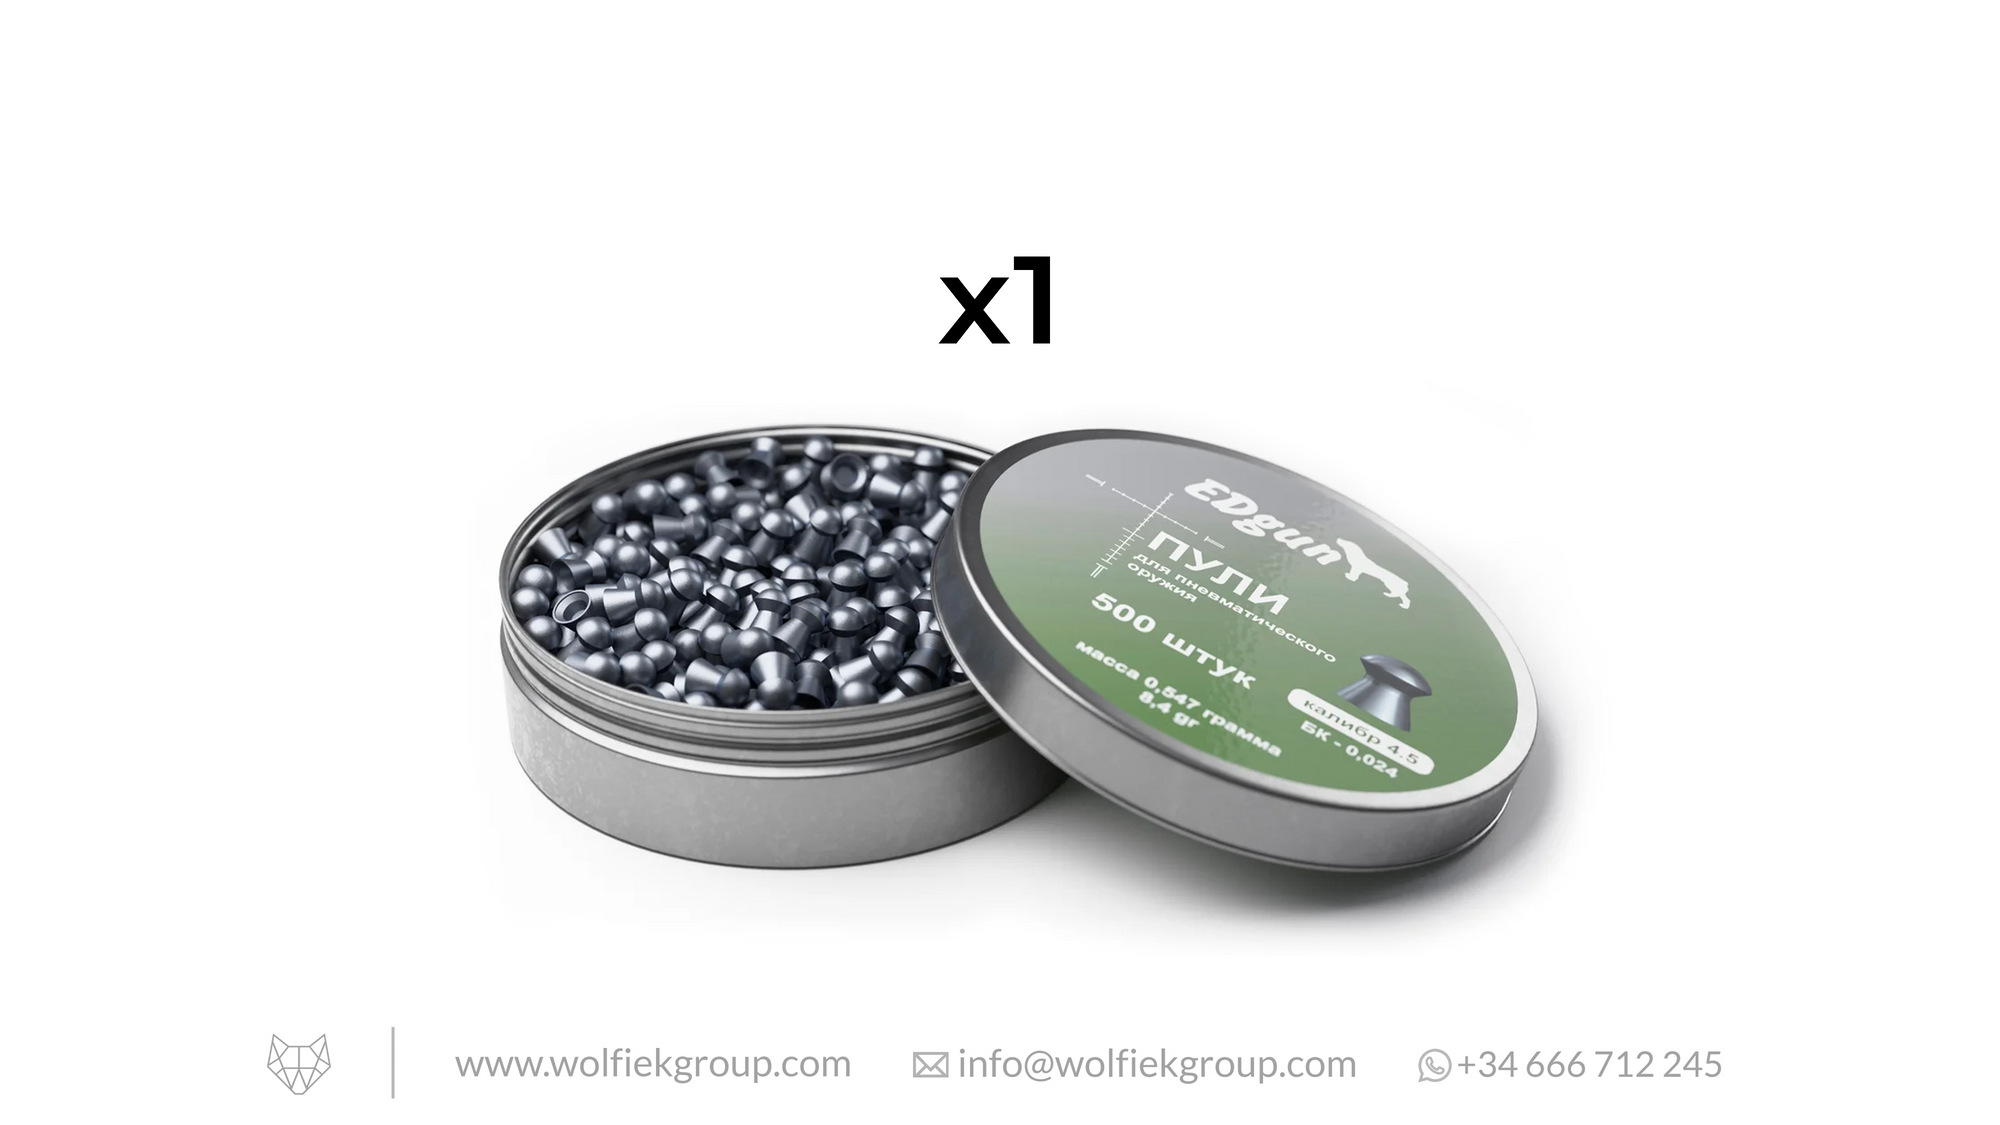 EDgun Premium Pellets Cal .177 (4,52mm) Weight 0,55g (8,4gr) with text buy 4 get 1 for free